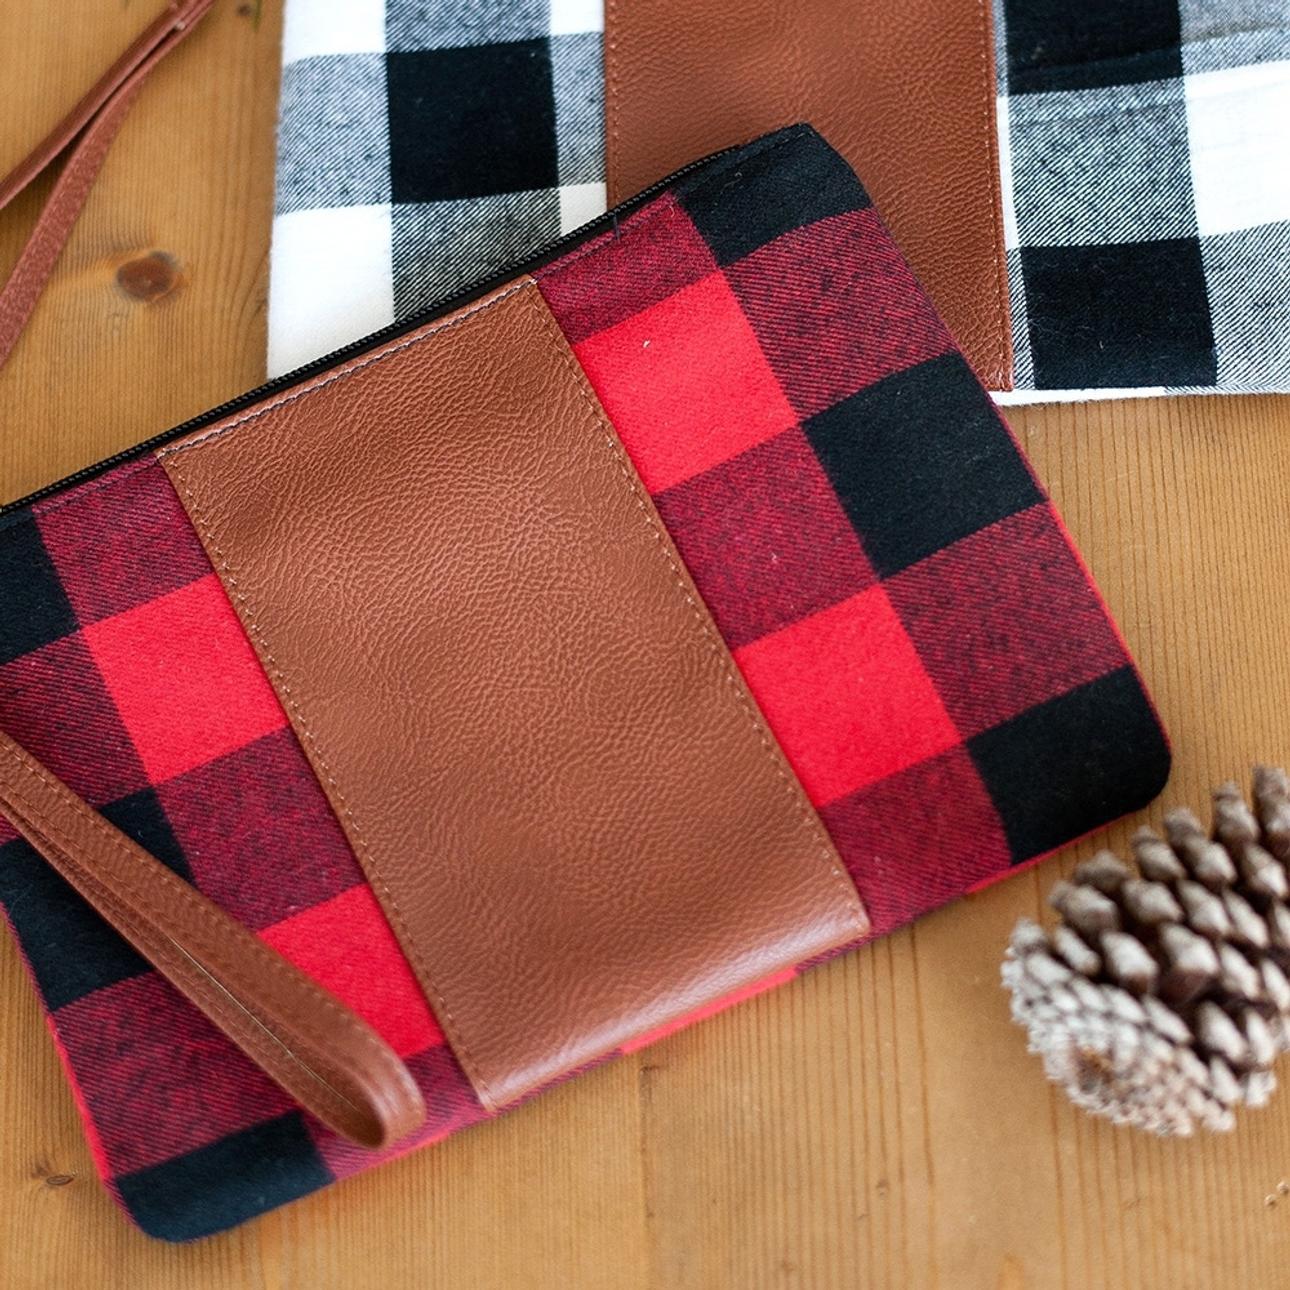 The Trendy Brown Checkered Wallet